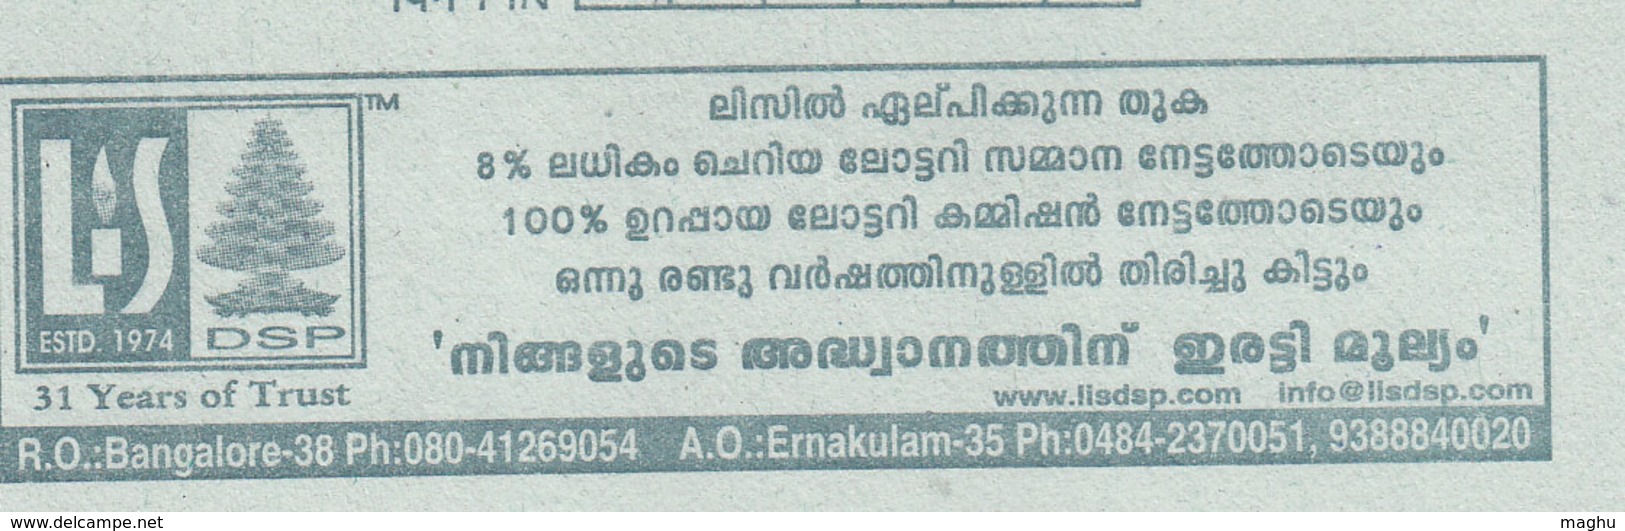 Advt., 'LIS DSP' Lottery And Finance Firm, Interest Symbol, Mathematics, Christmas Tree, Candle, ILC Unused Stationery - Inland Letter Cards